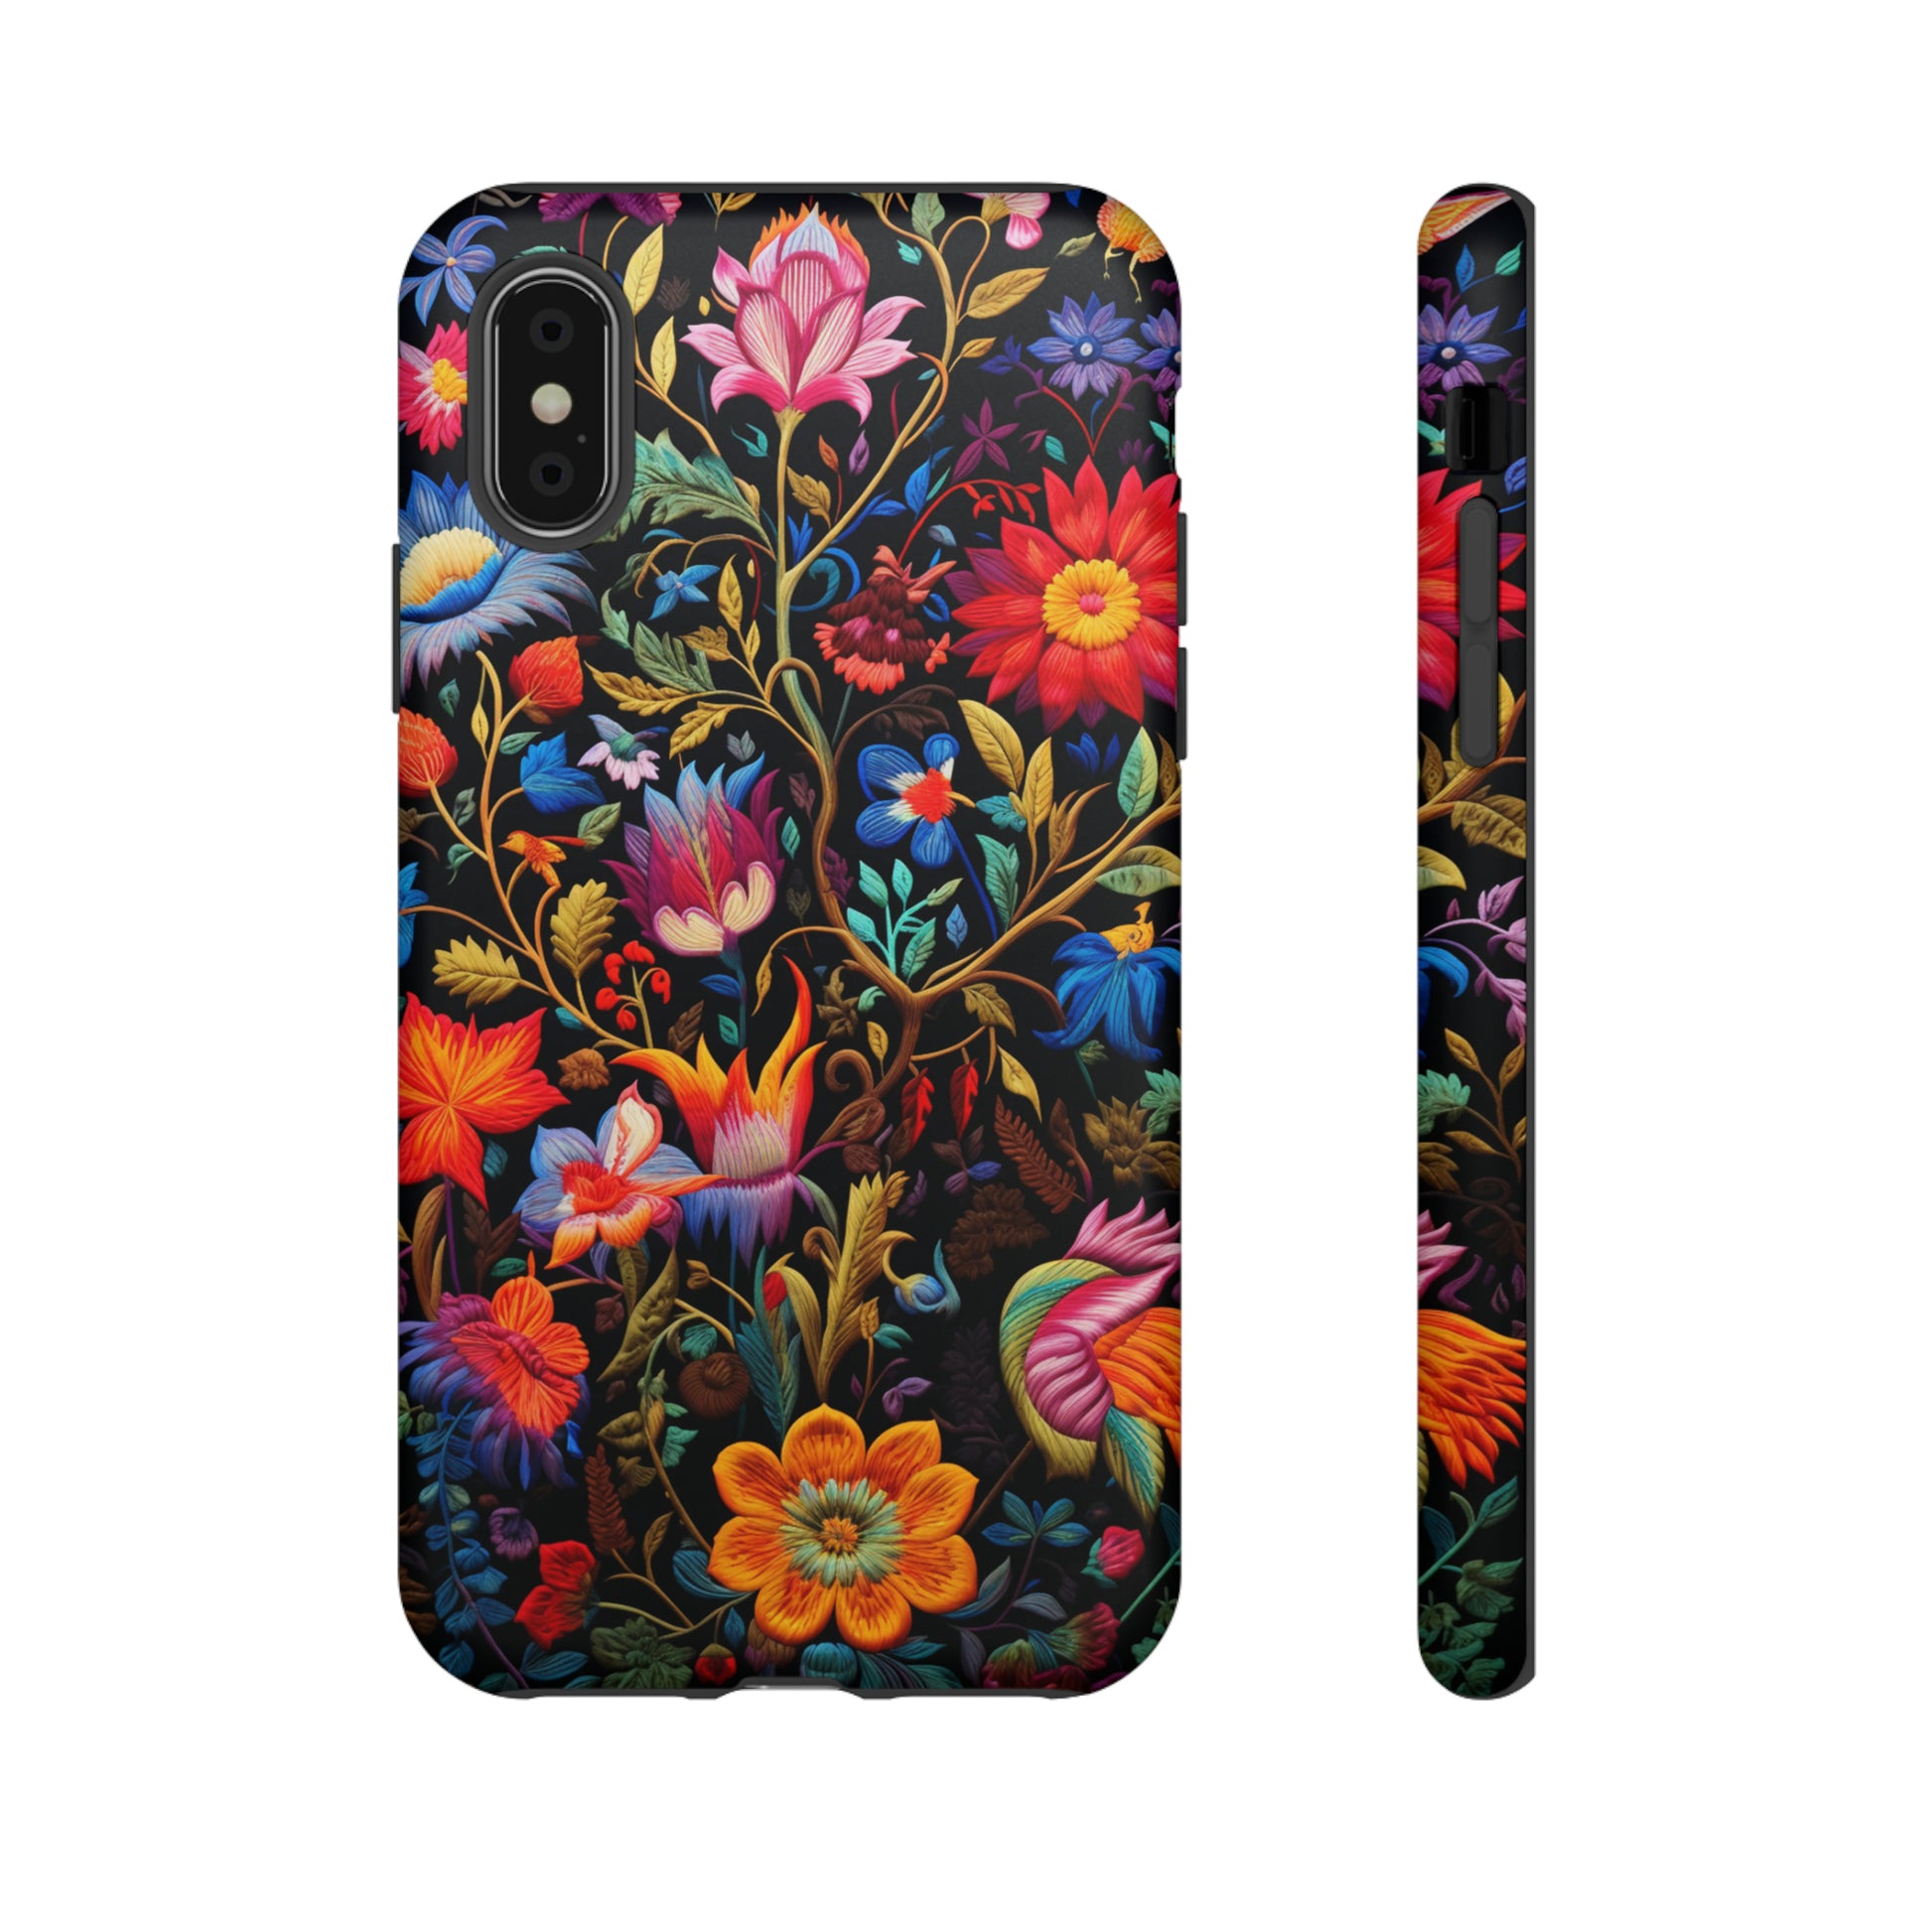 Colorful embroidery-style design phone case for Google Pixel